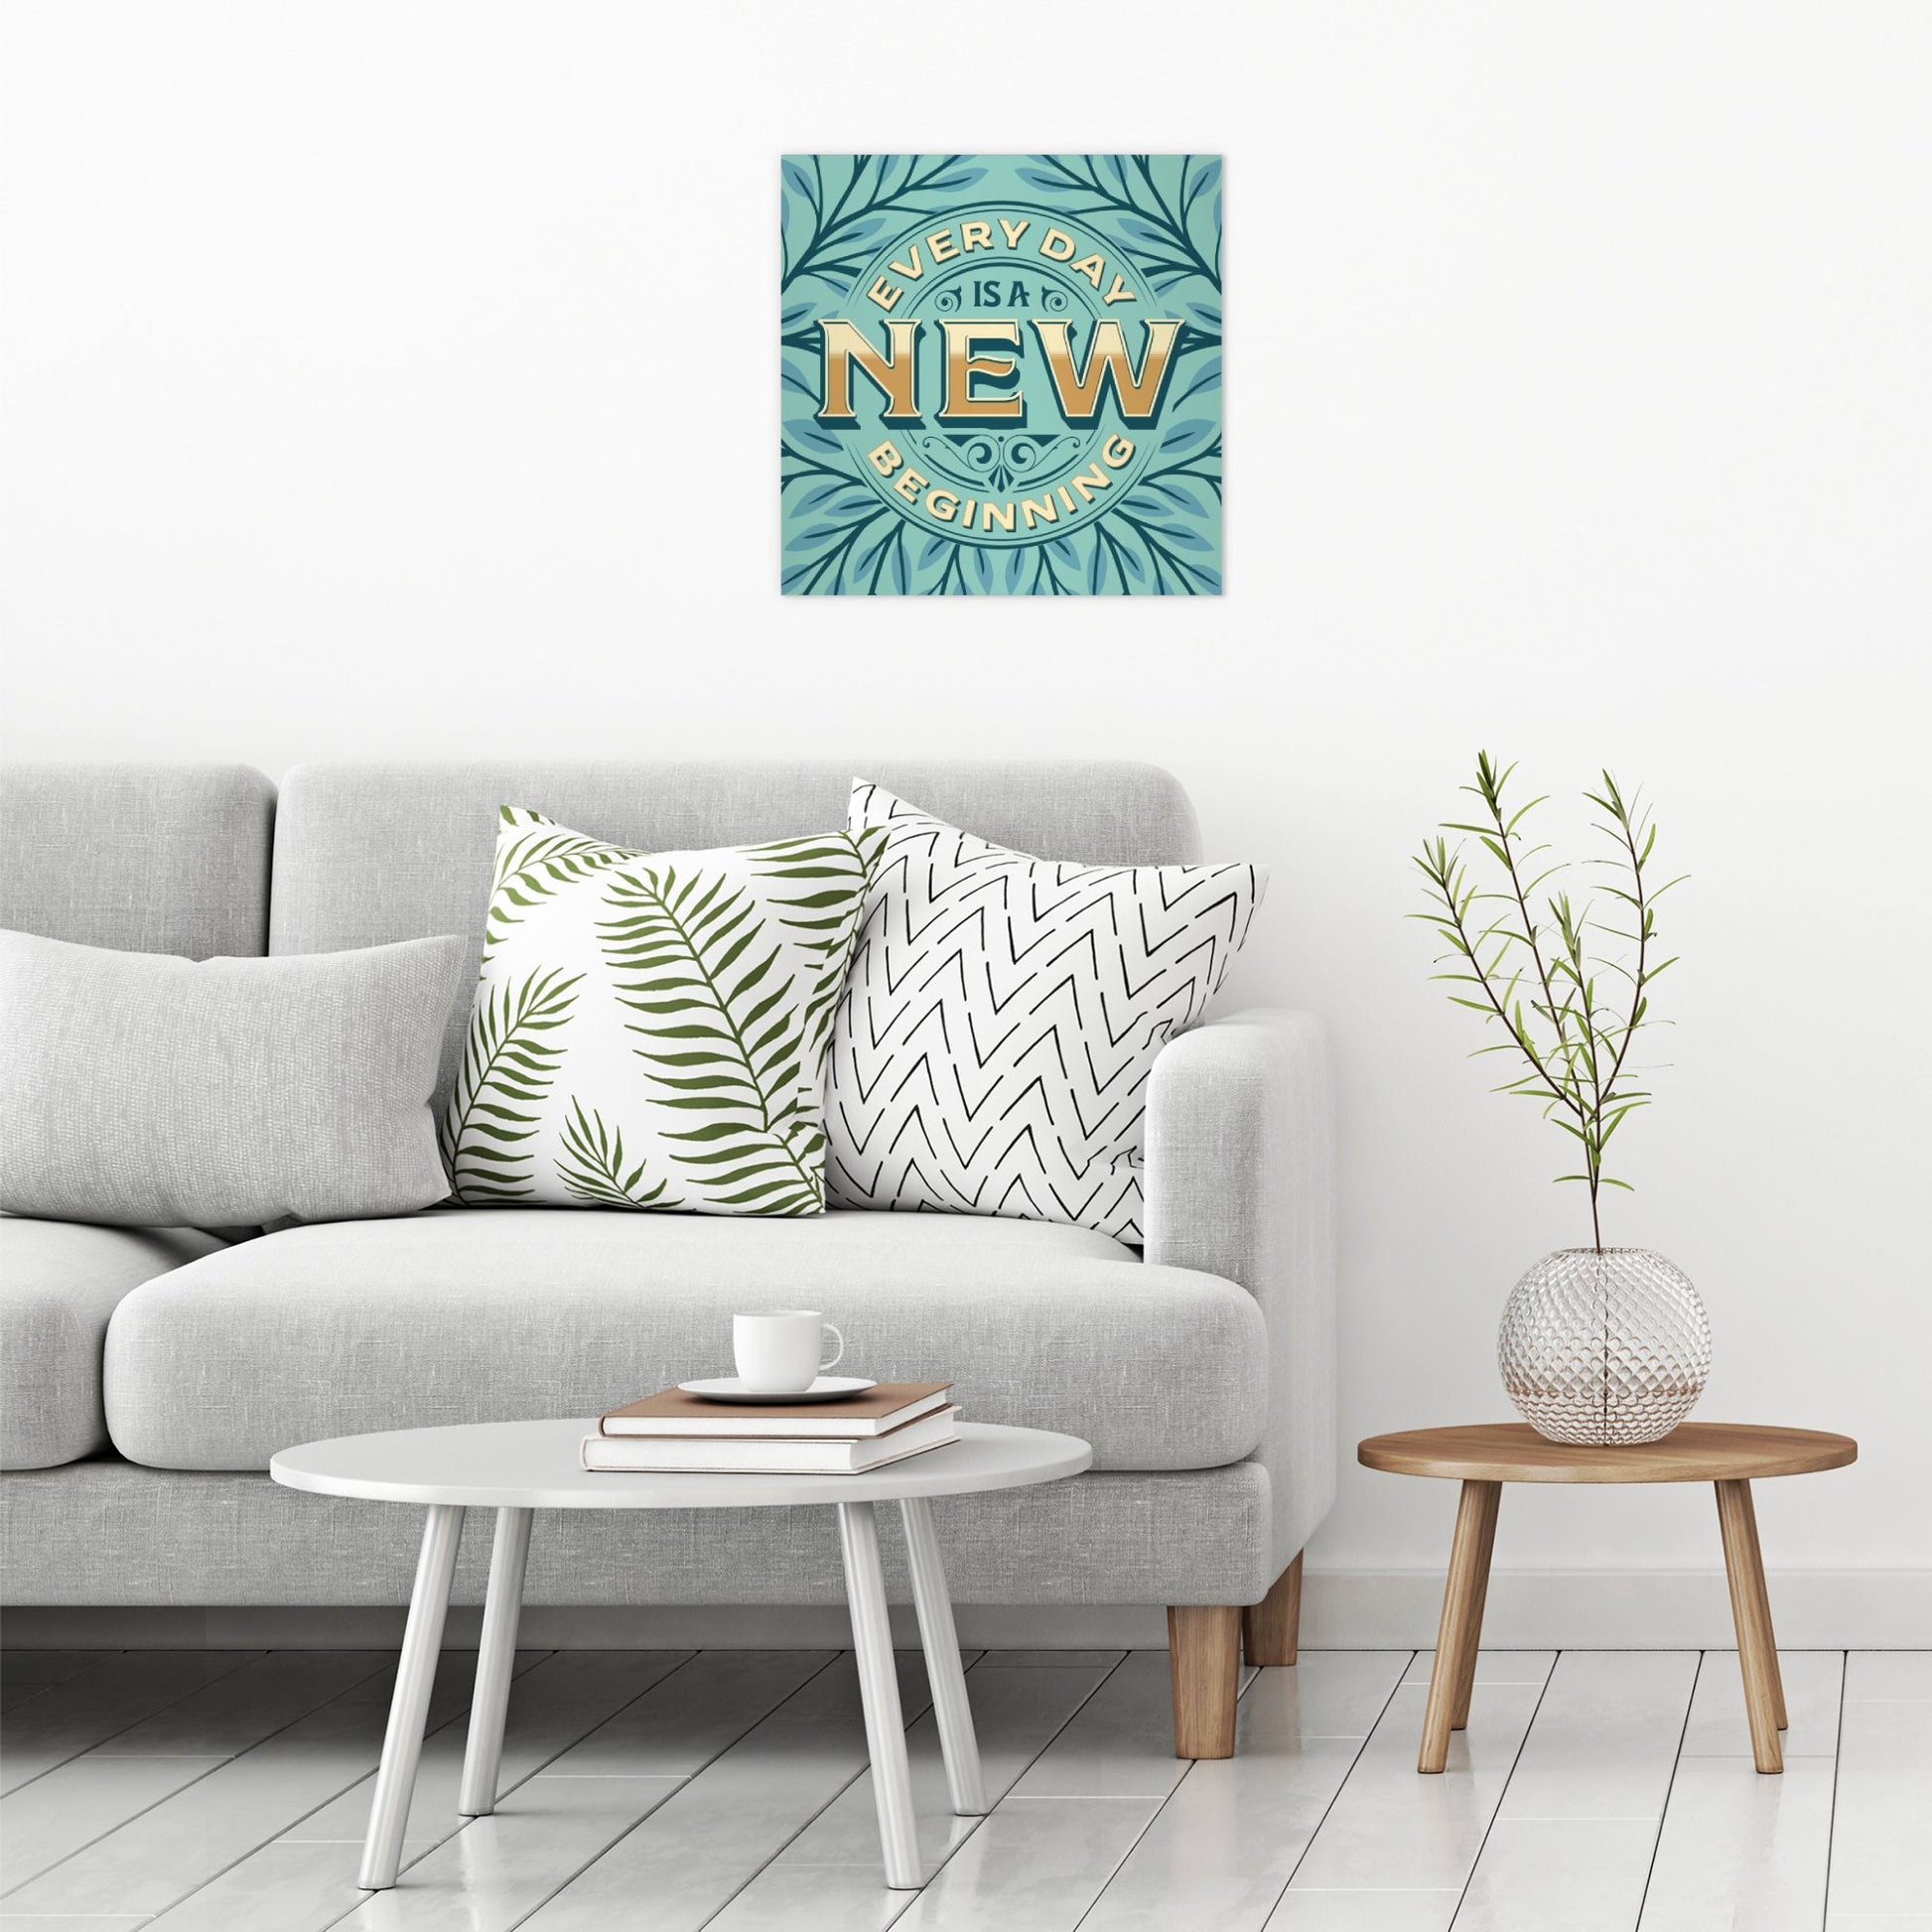 A contemporary modern room view showing a large size metal art poster display plate with printed design of a Every Day is A New Beginning Quote